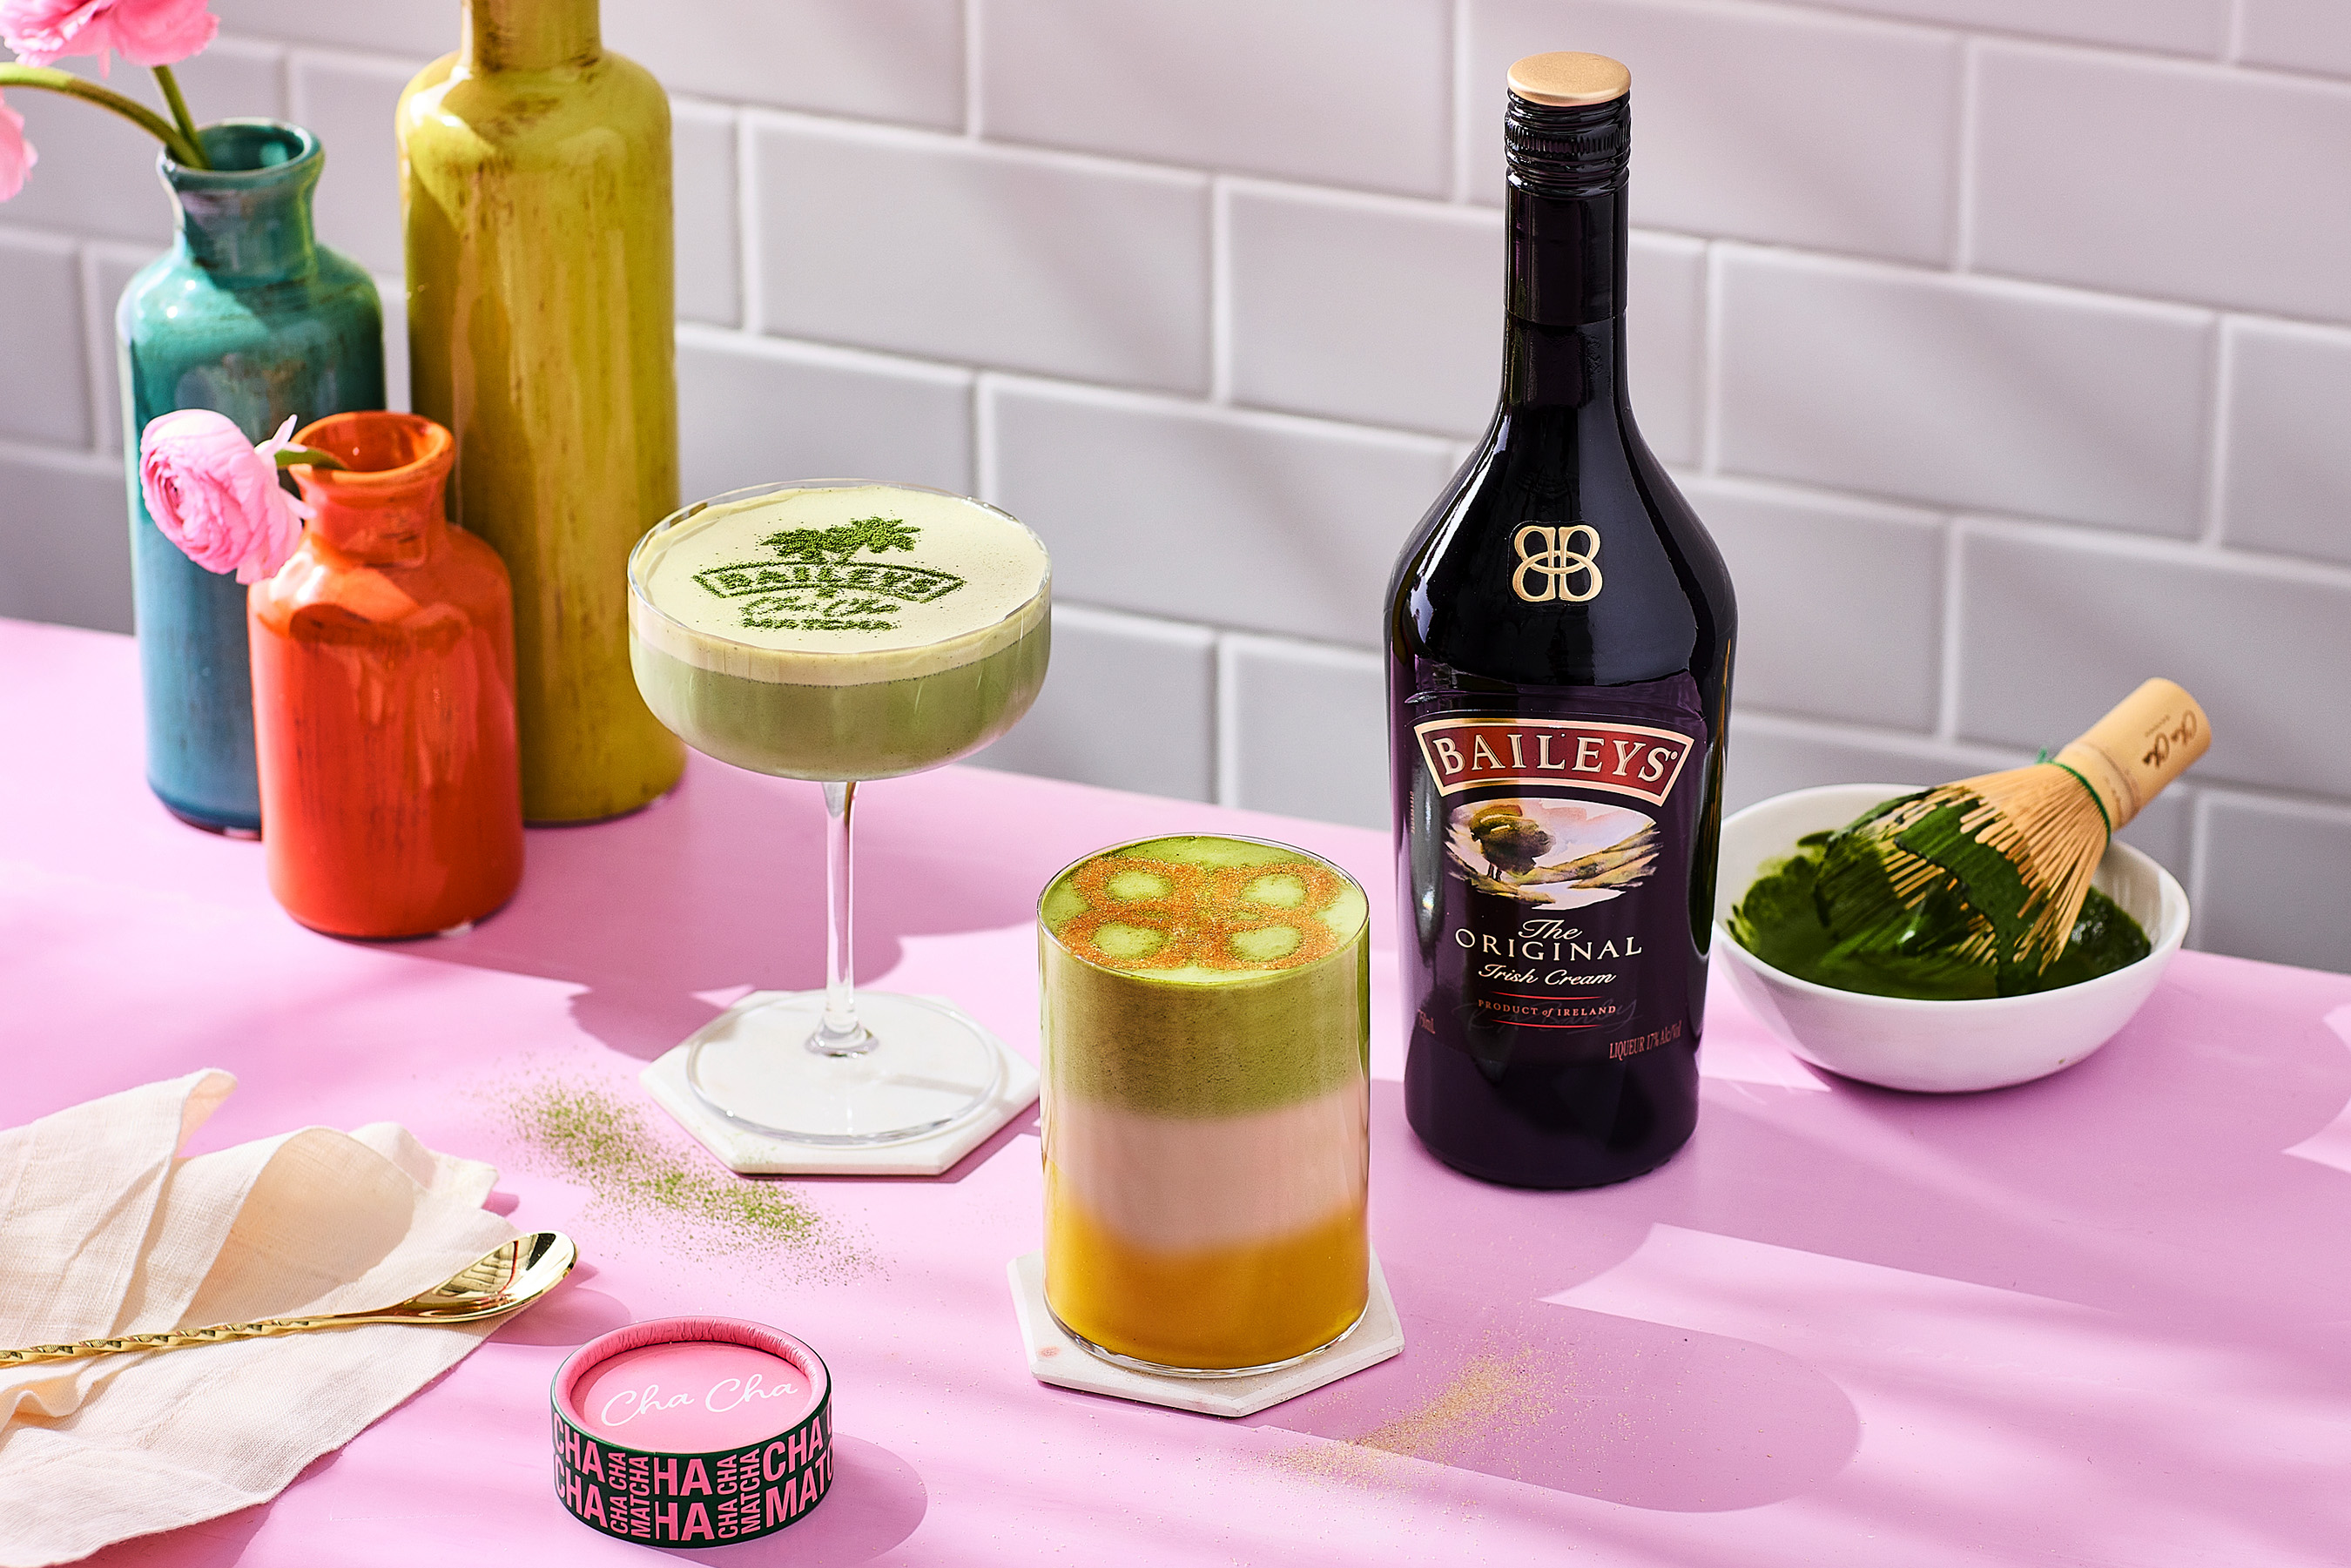 A Matcha Made in Heaven! Baileys Original Irish Cream Liqueur Partners with Cha Cha Matcha to Create the Most Insta-Worthy Drink of the Season